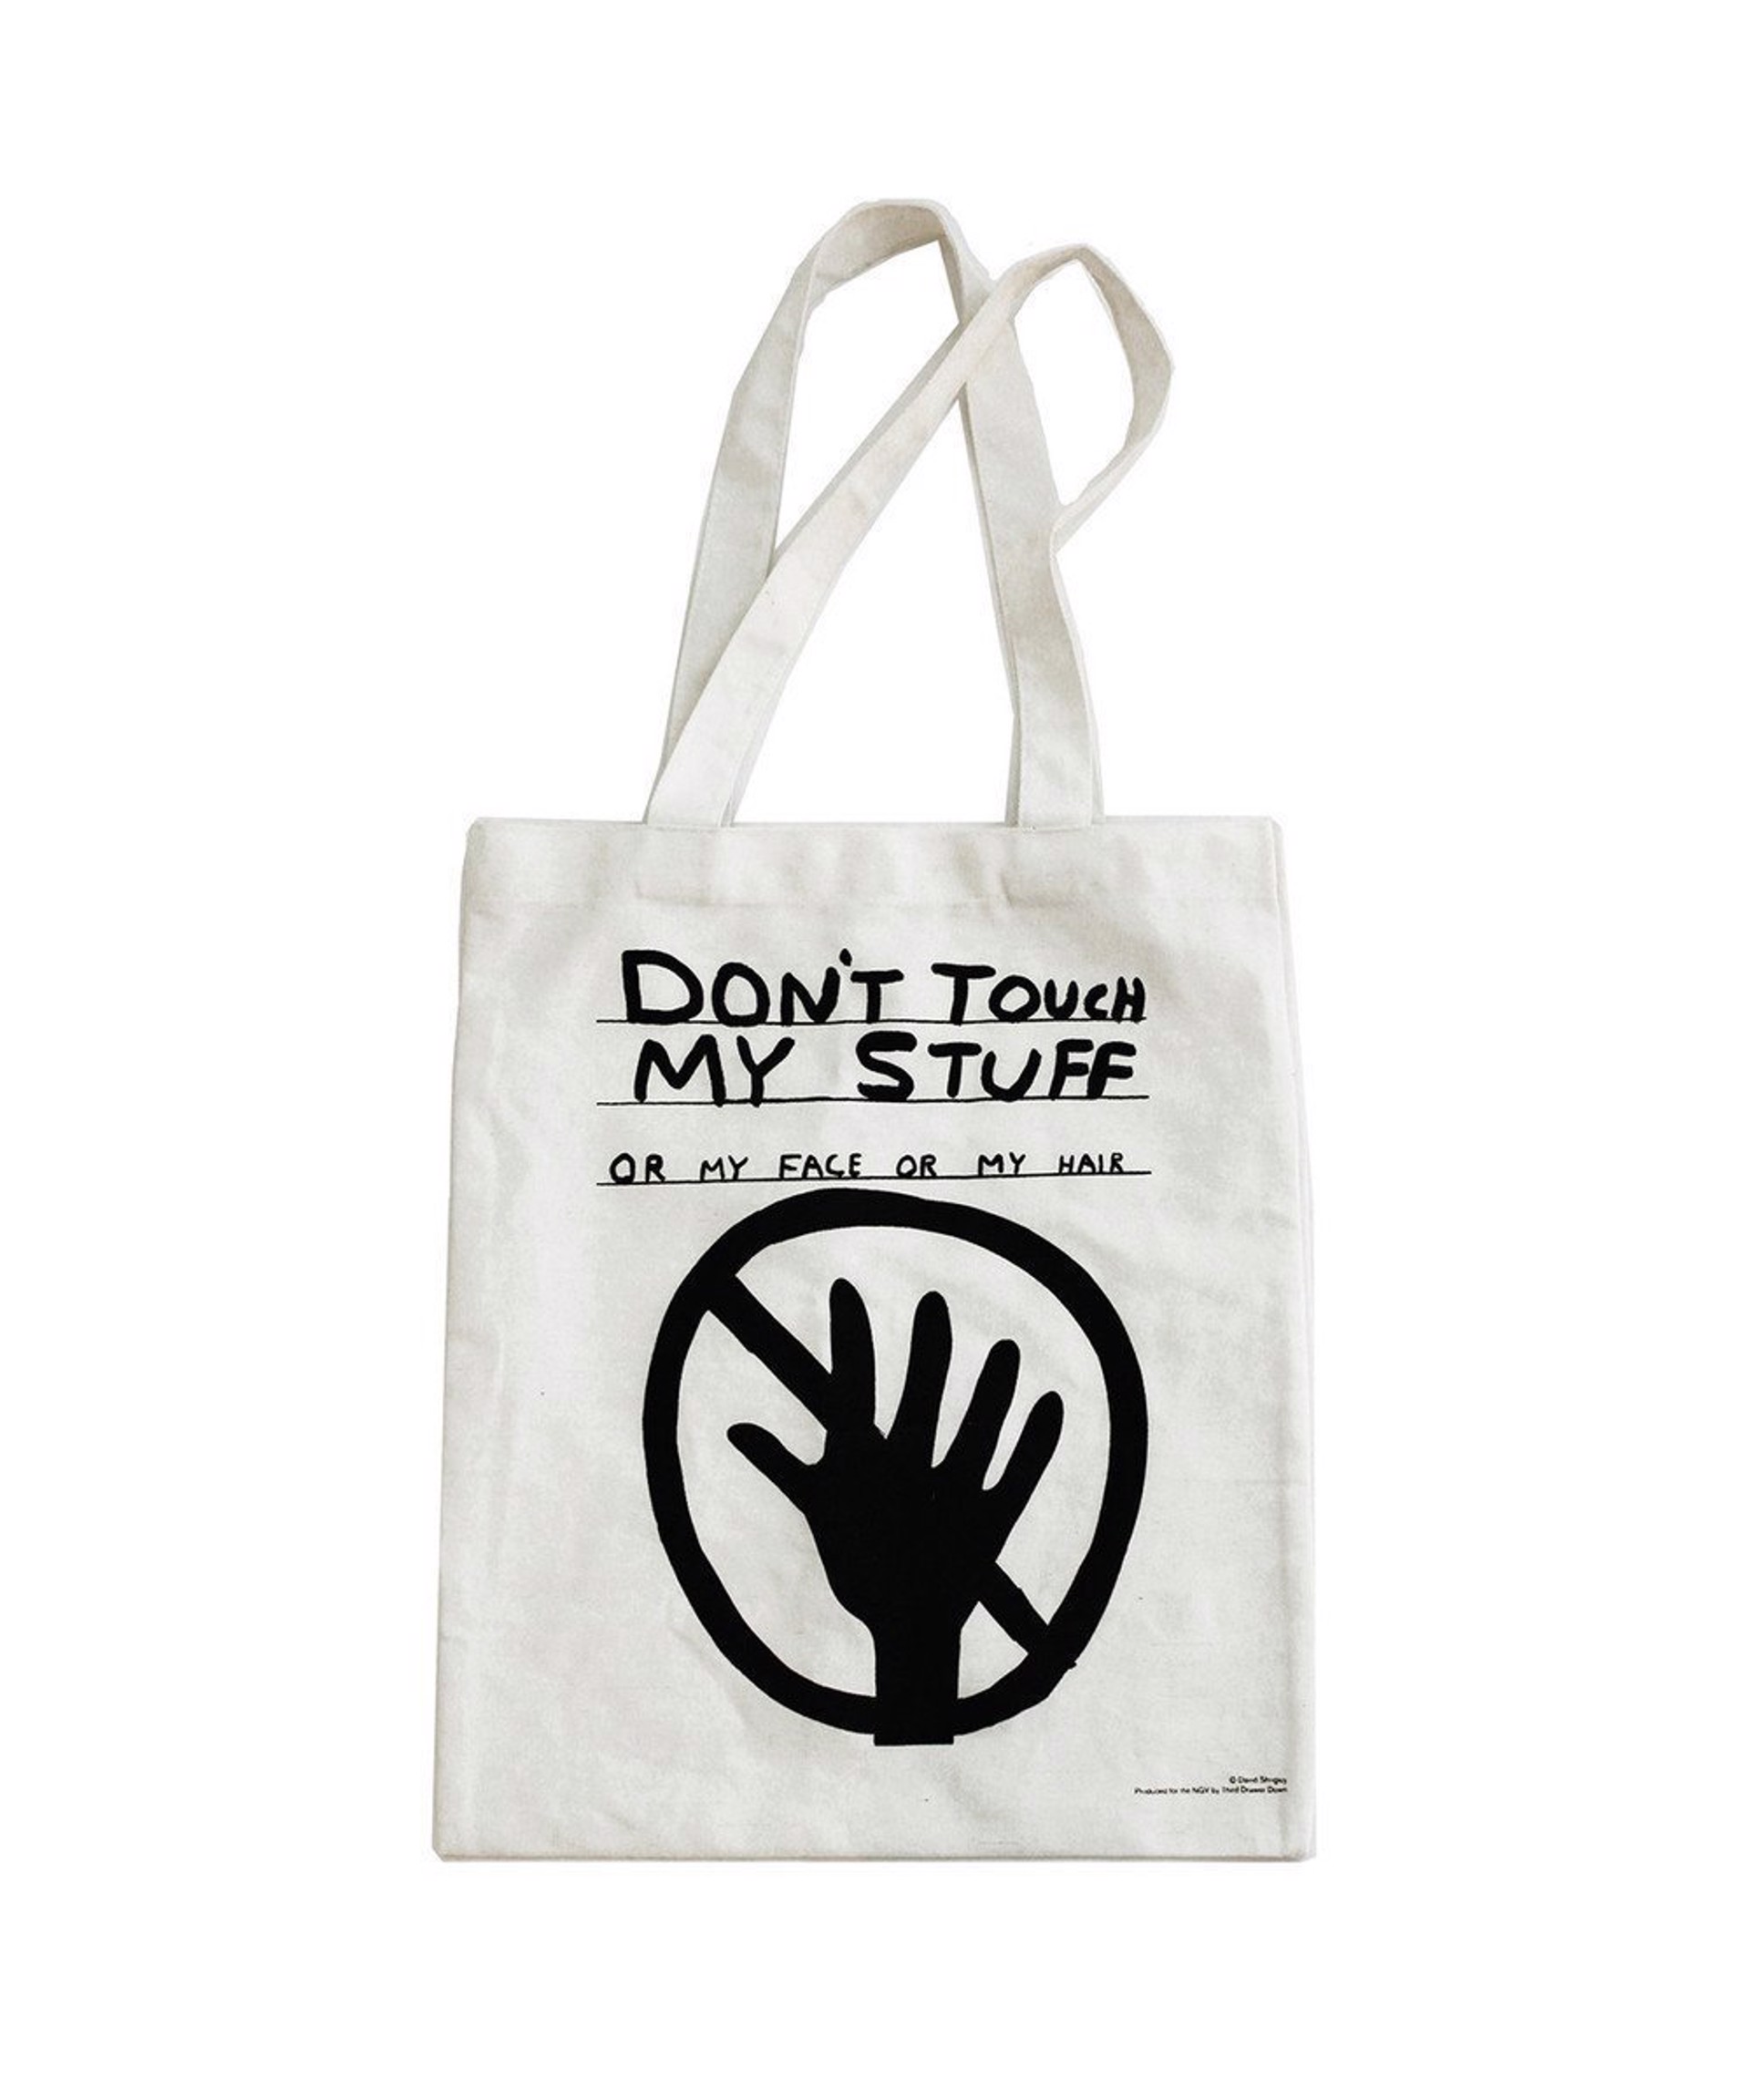 Don't Touch My Stuff Tote Bag by David Shrigley